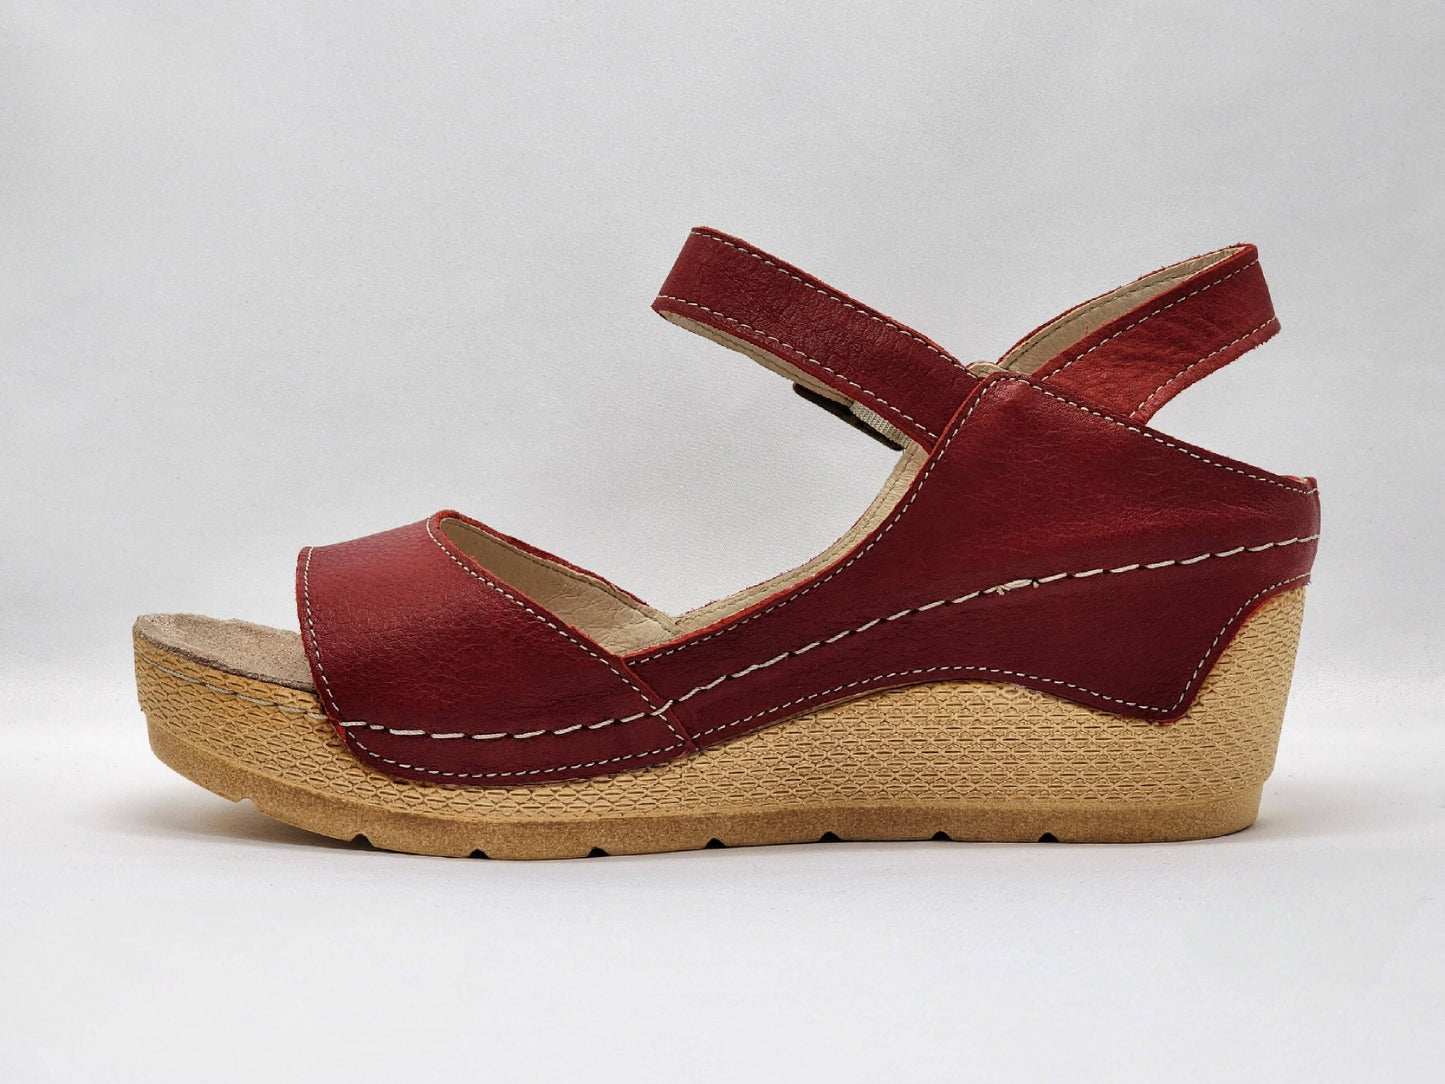 [Women's Red Leather Sandals] - Kacper Global Shoes 